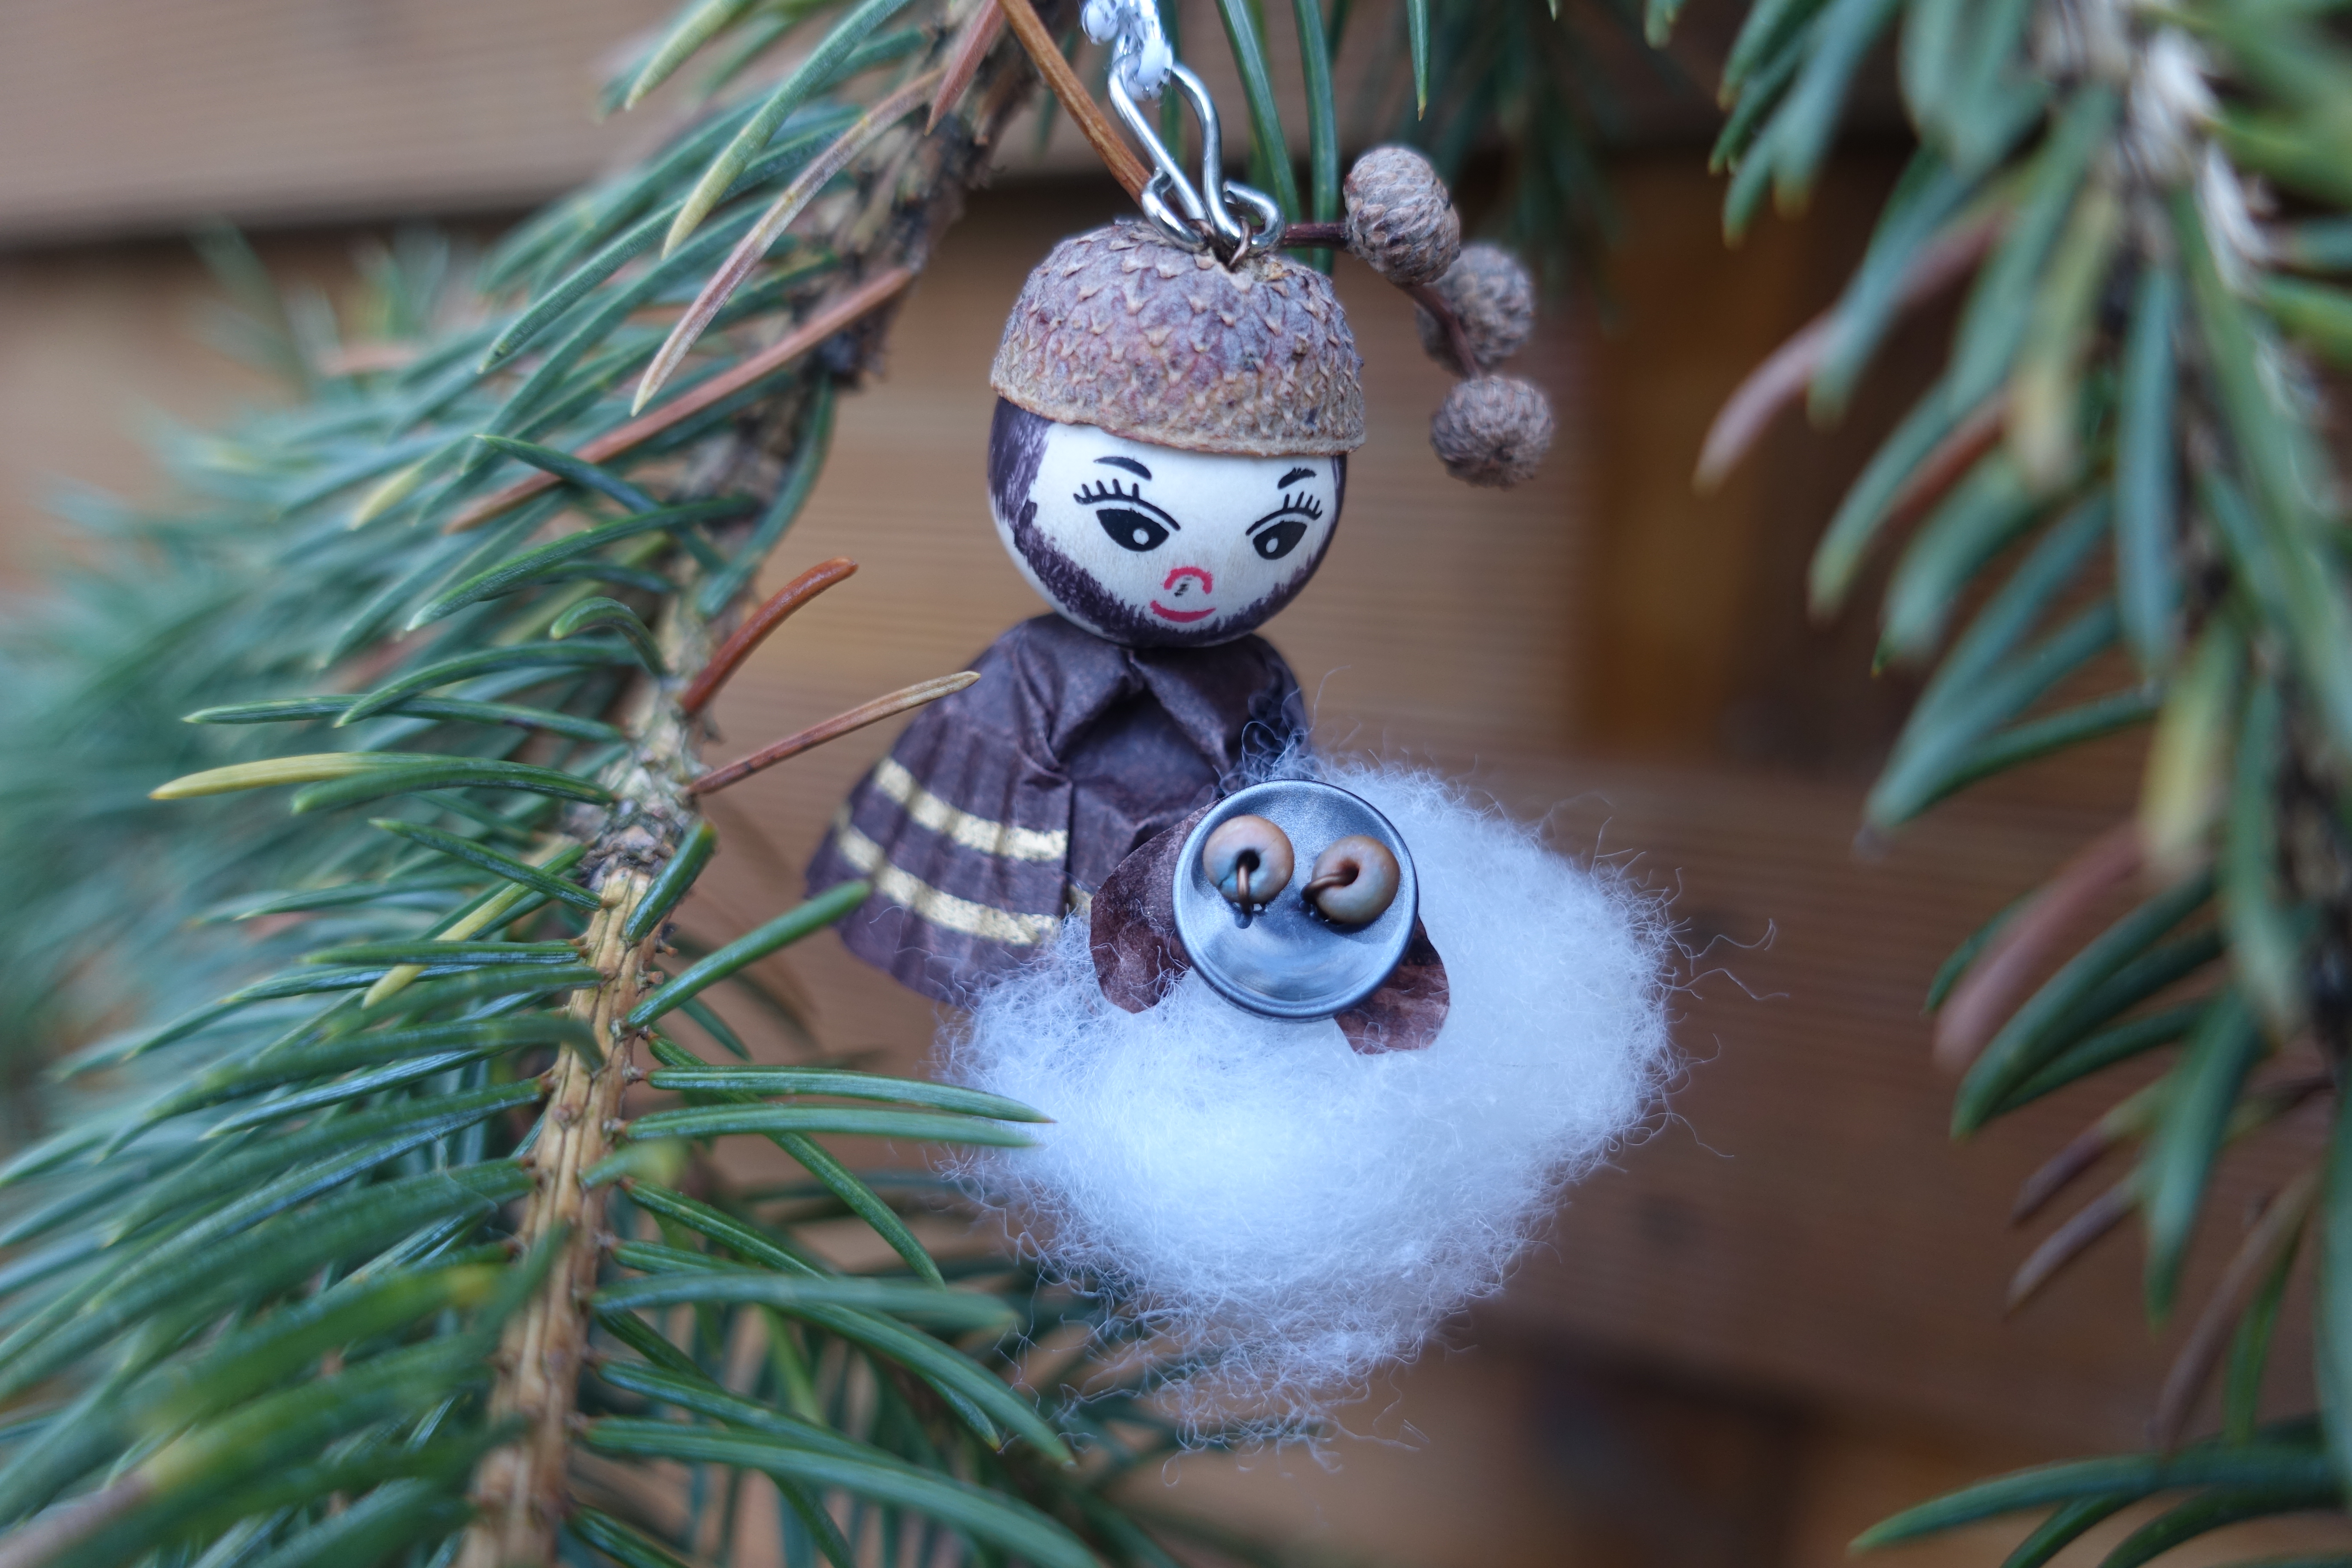 Shepherd ornament with a sheep